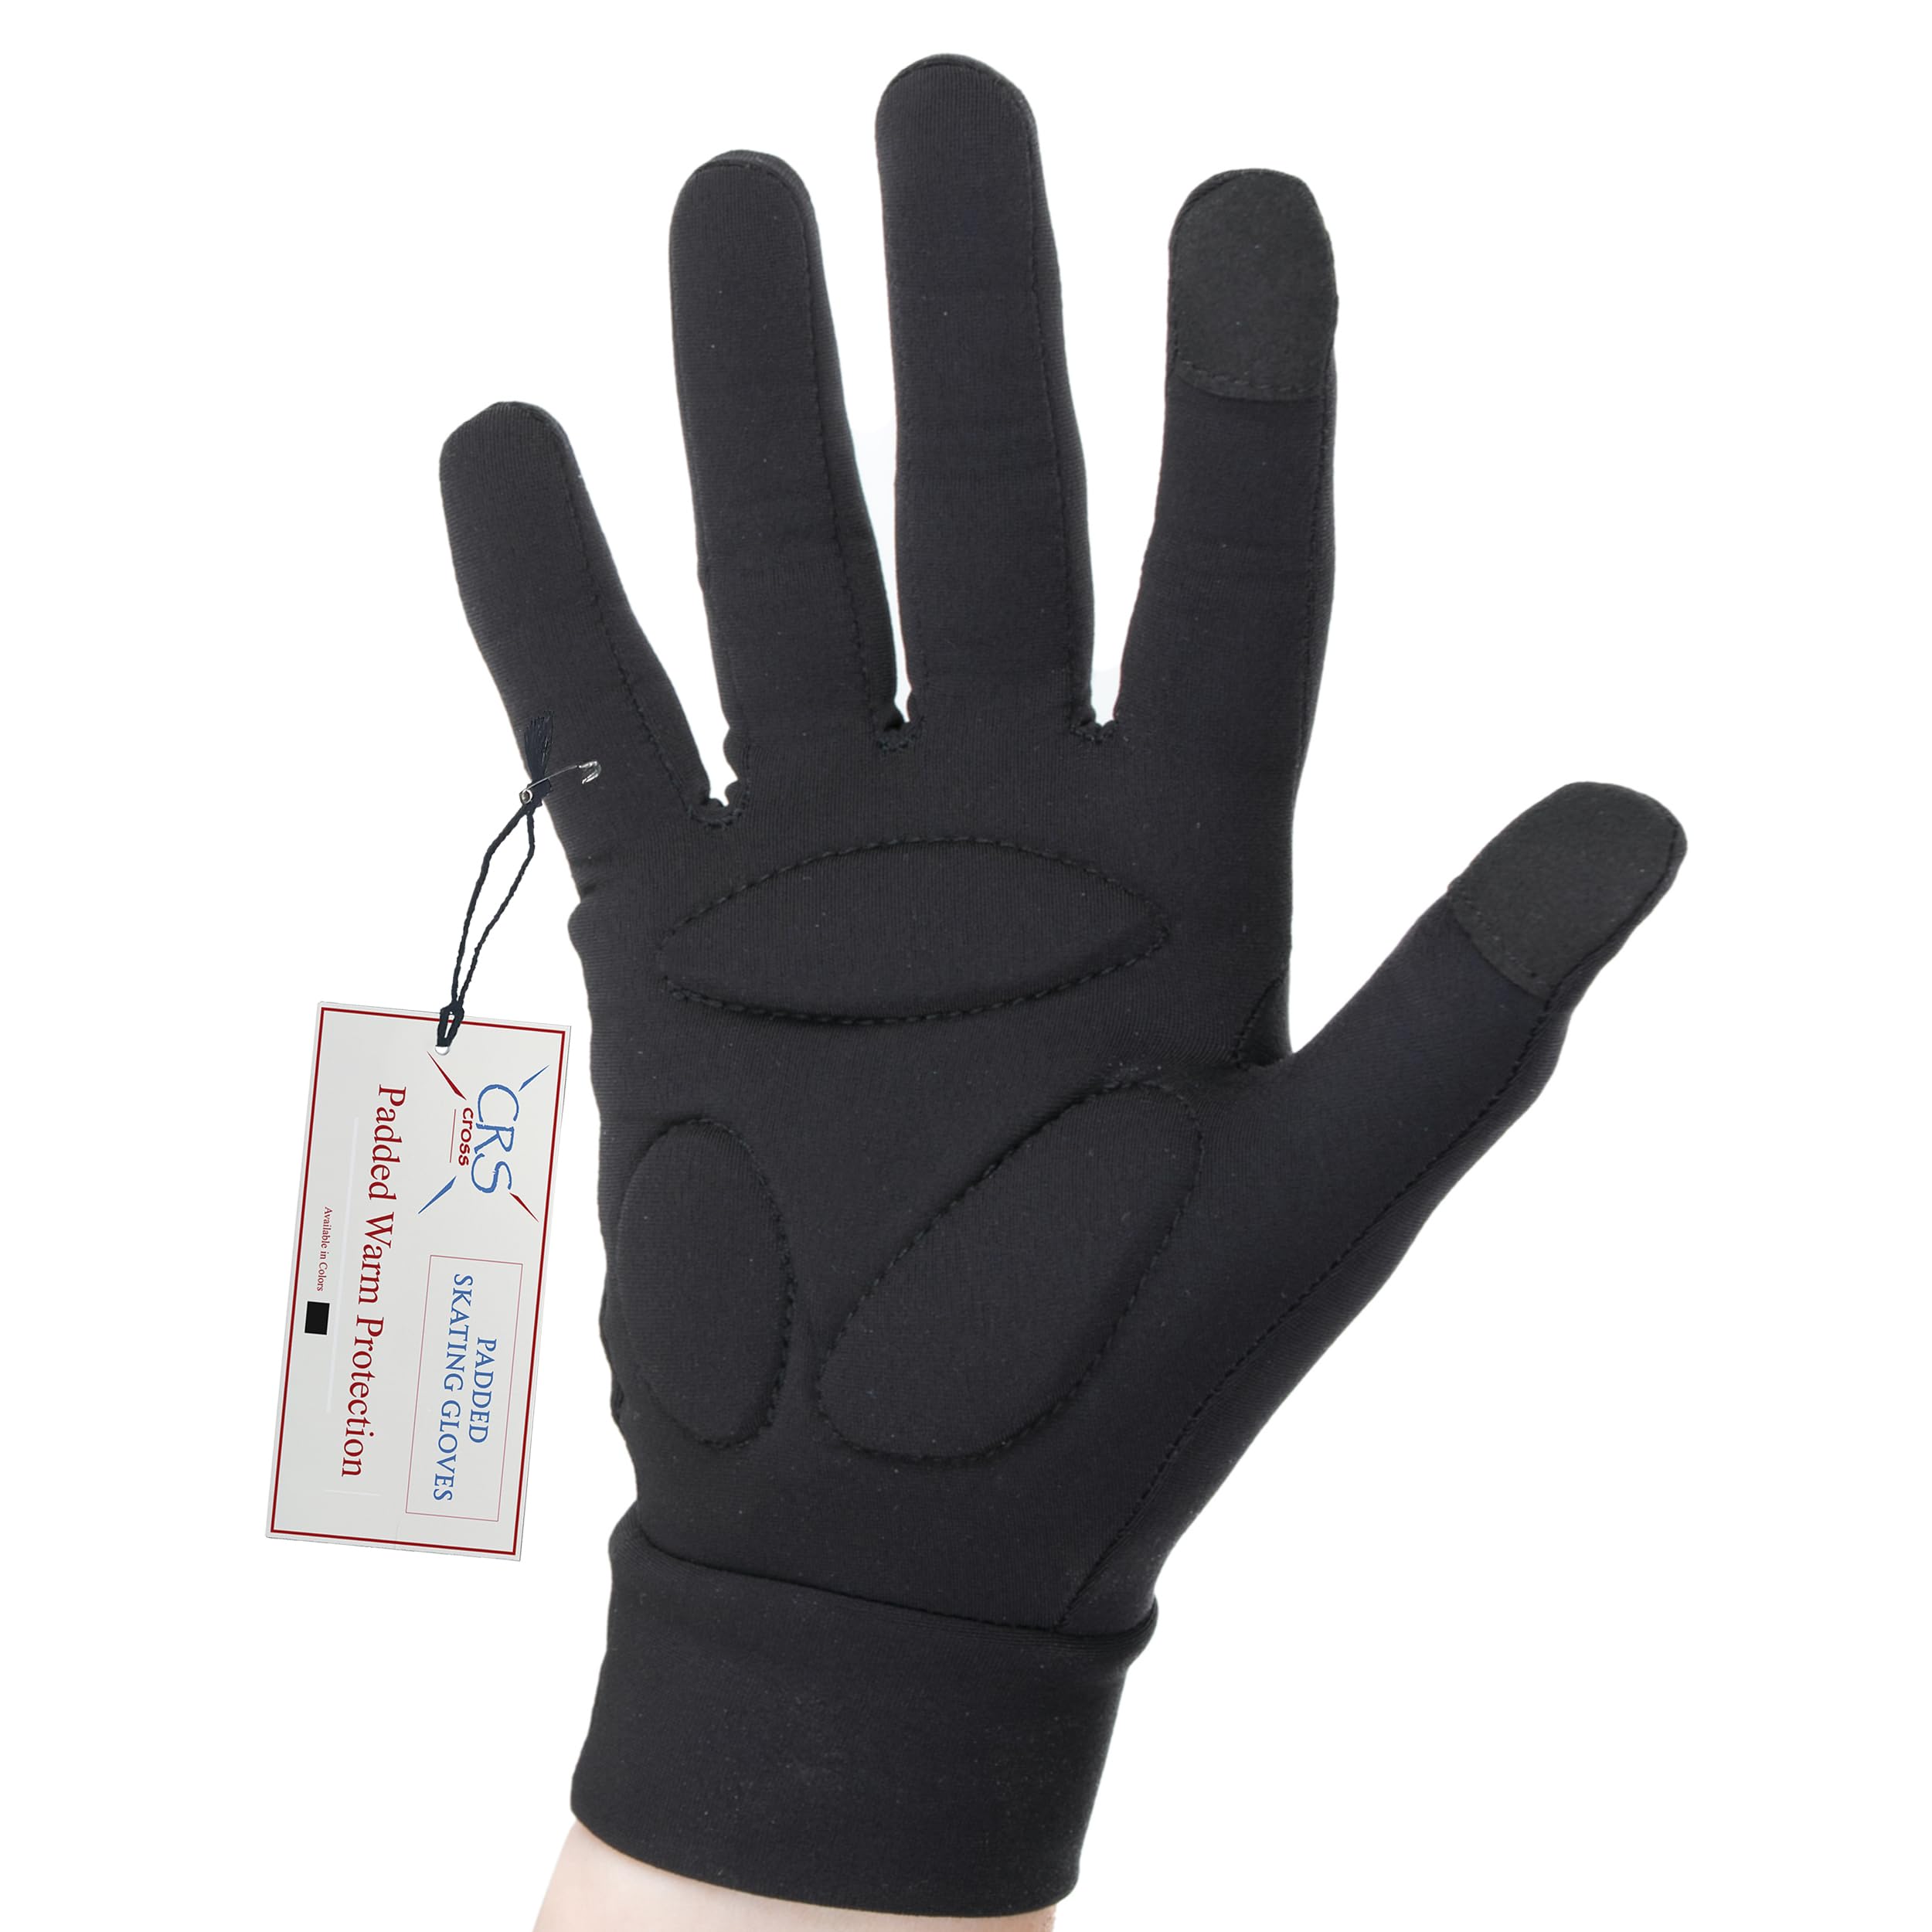 CRS Cross Padded Skating Gloves - Warm Padded Protection for Ice Skating Practice, Figure Skating Testing, Dance Competition, Roller Skating and Cheer. (Black, Youth Small- Toddler)